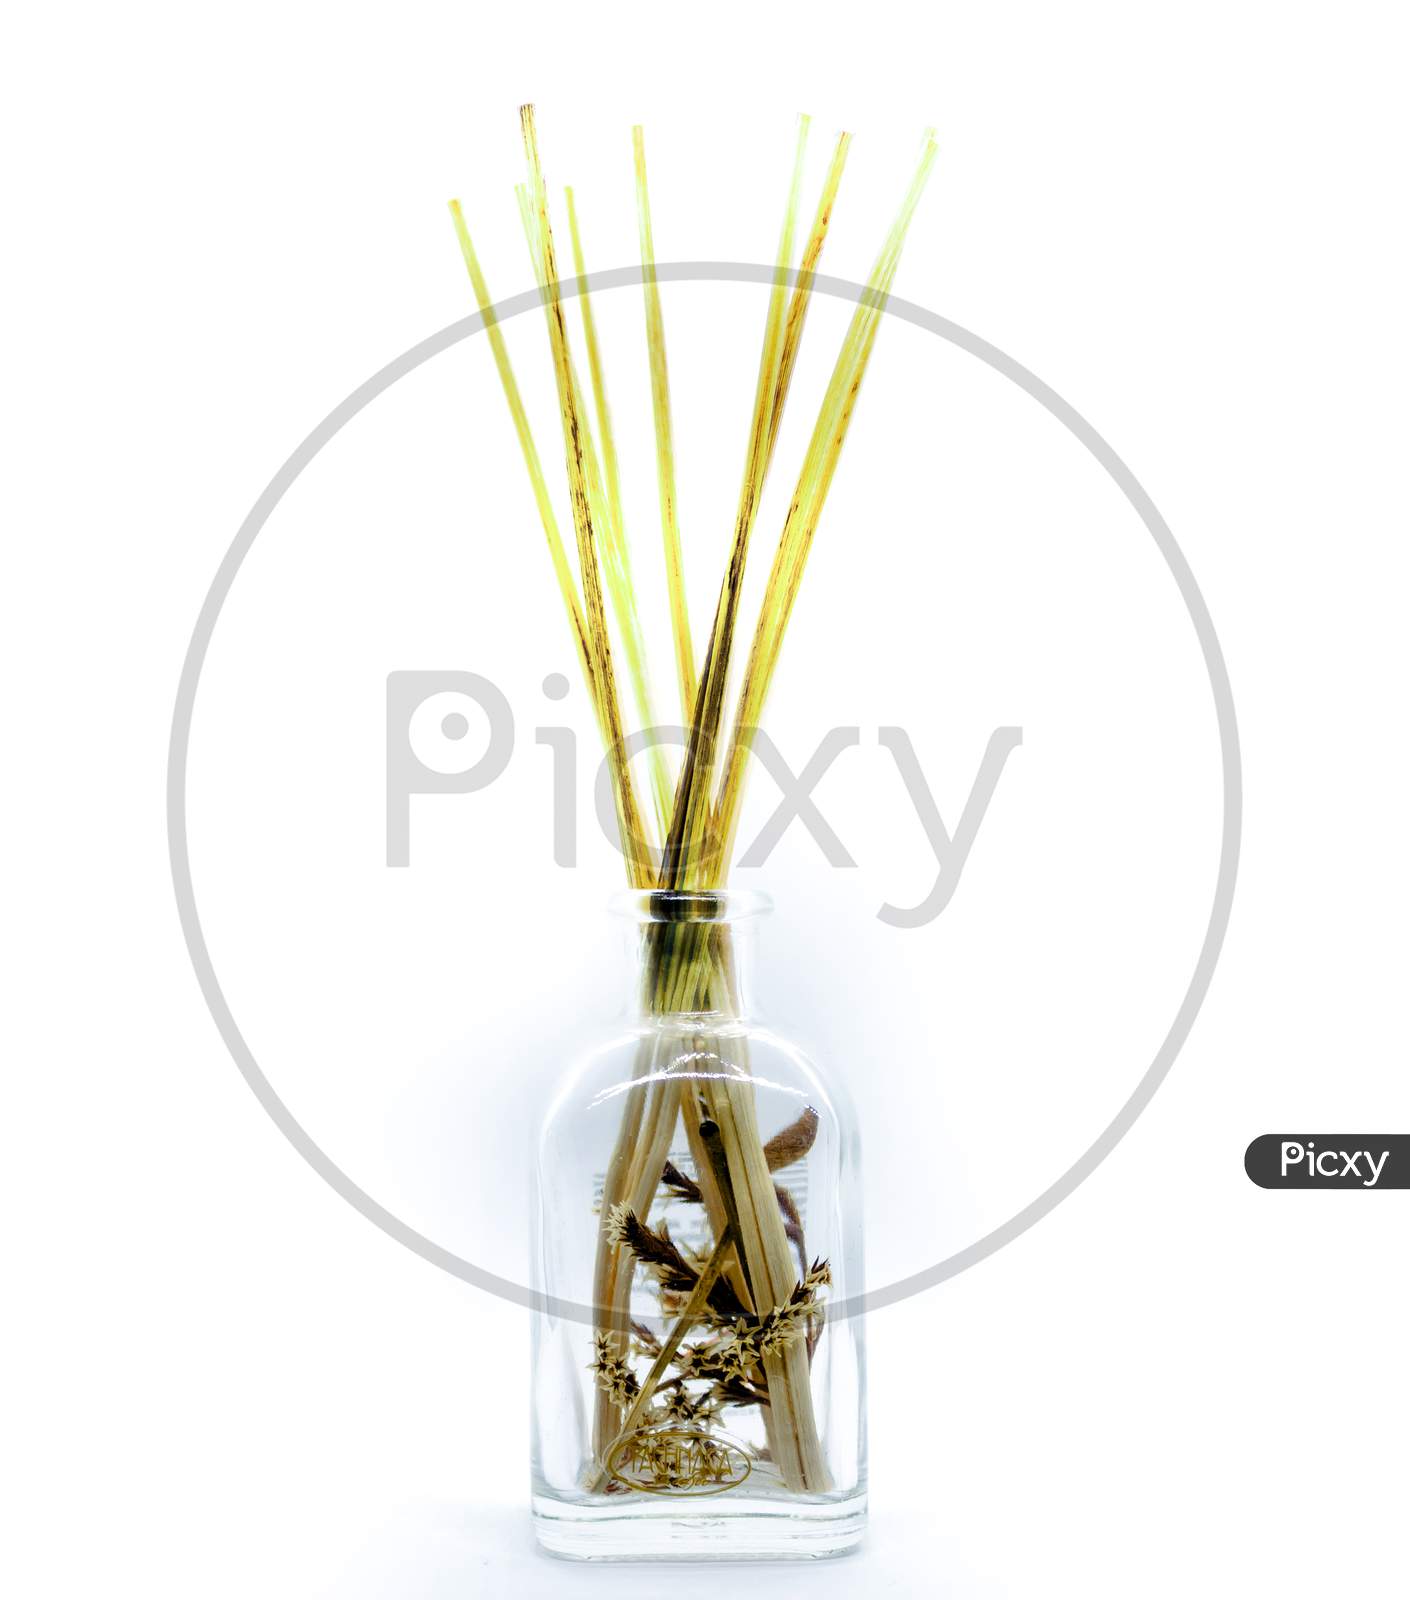 Close Up Of An Object With Wood Sticks In Liquid For Home Fragrance Or No Fire Aroma Diffuser With Sticks